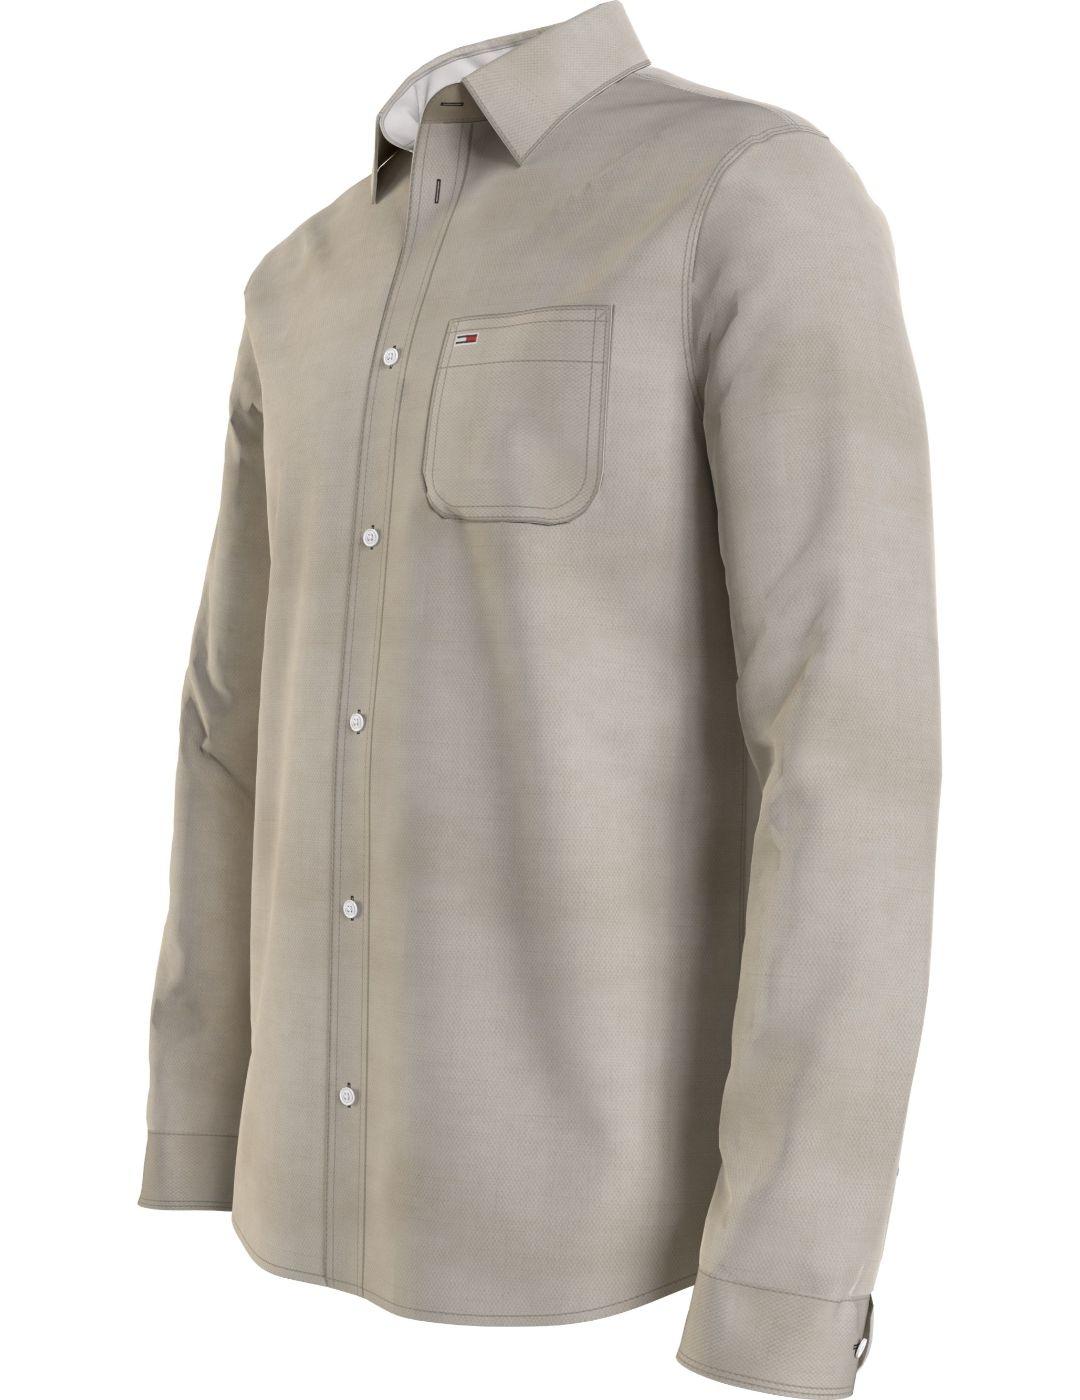 Camisa Tommy lino beige para hombre -a